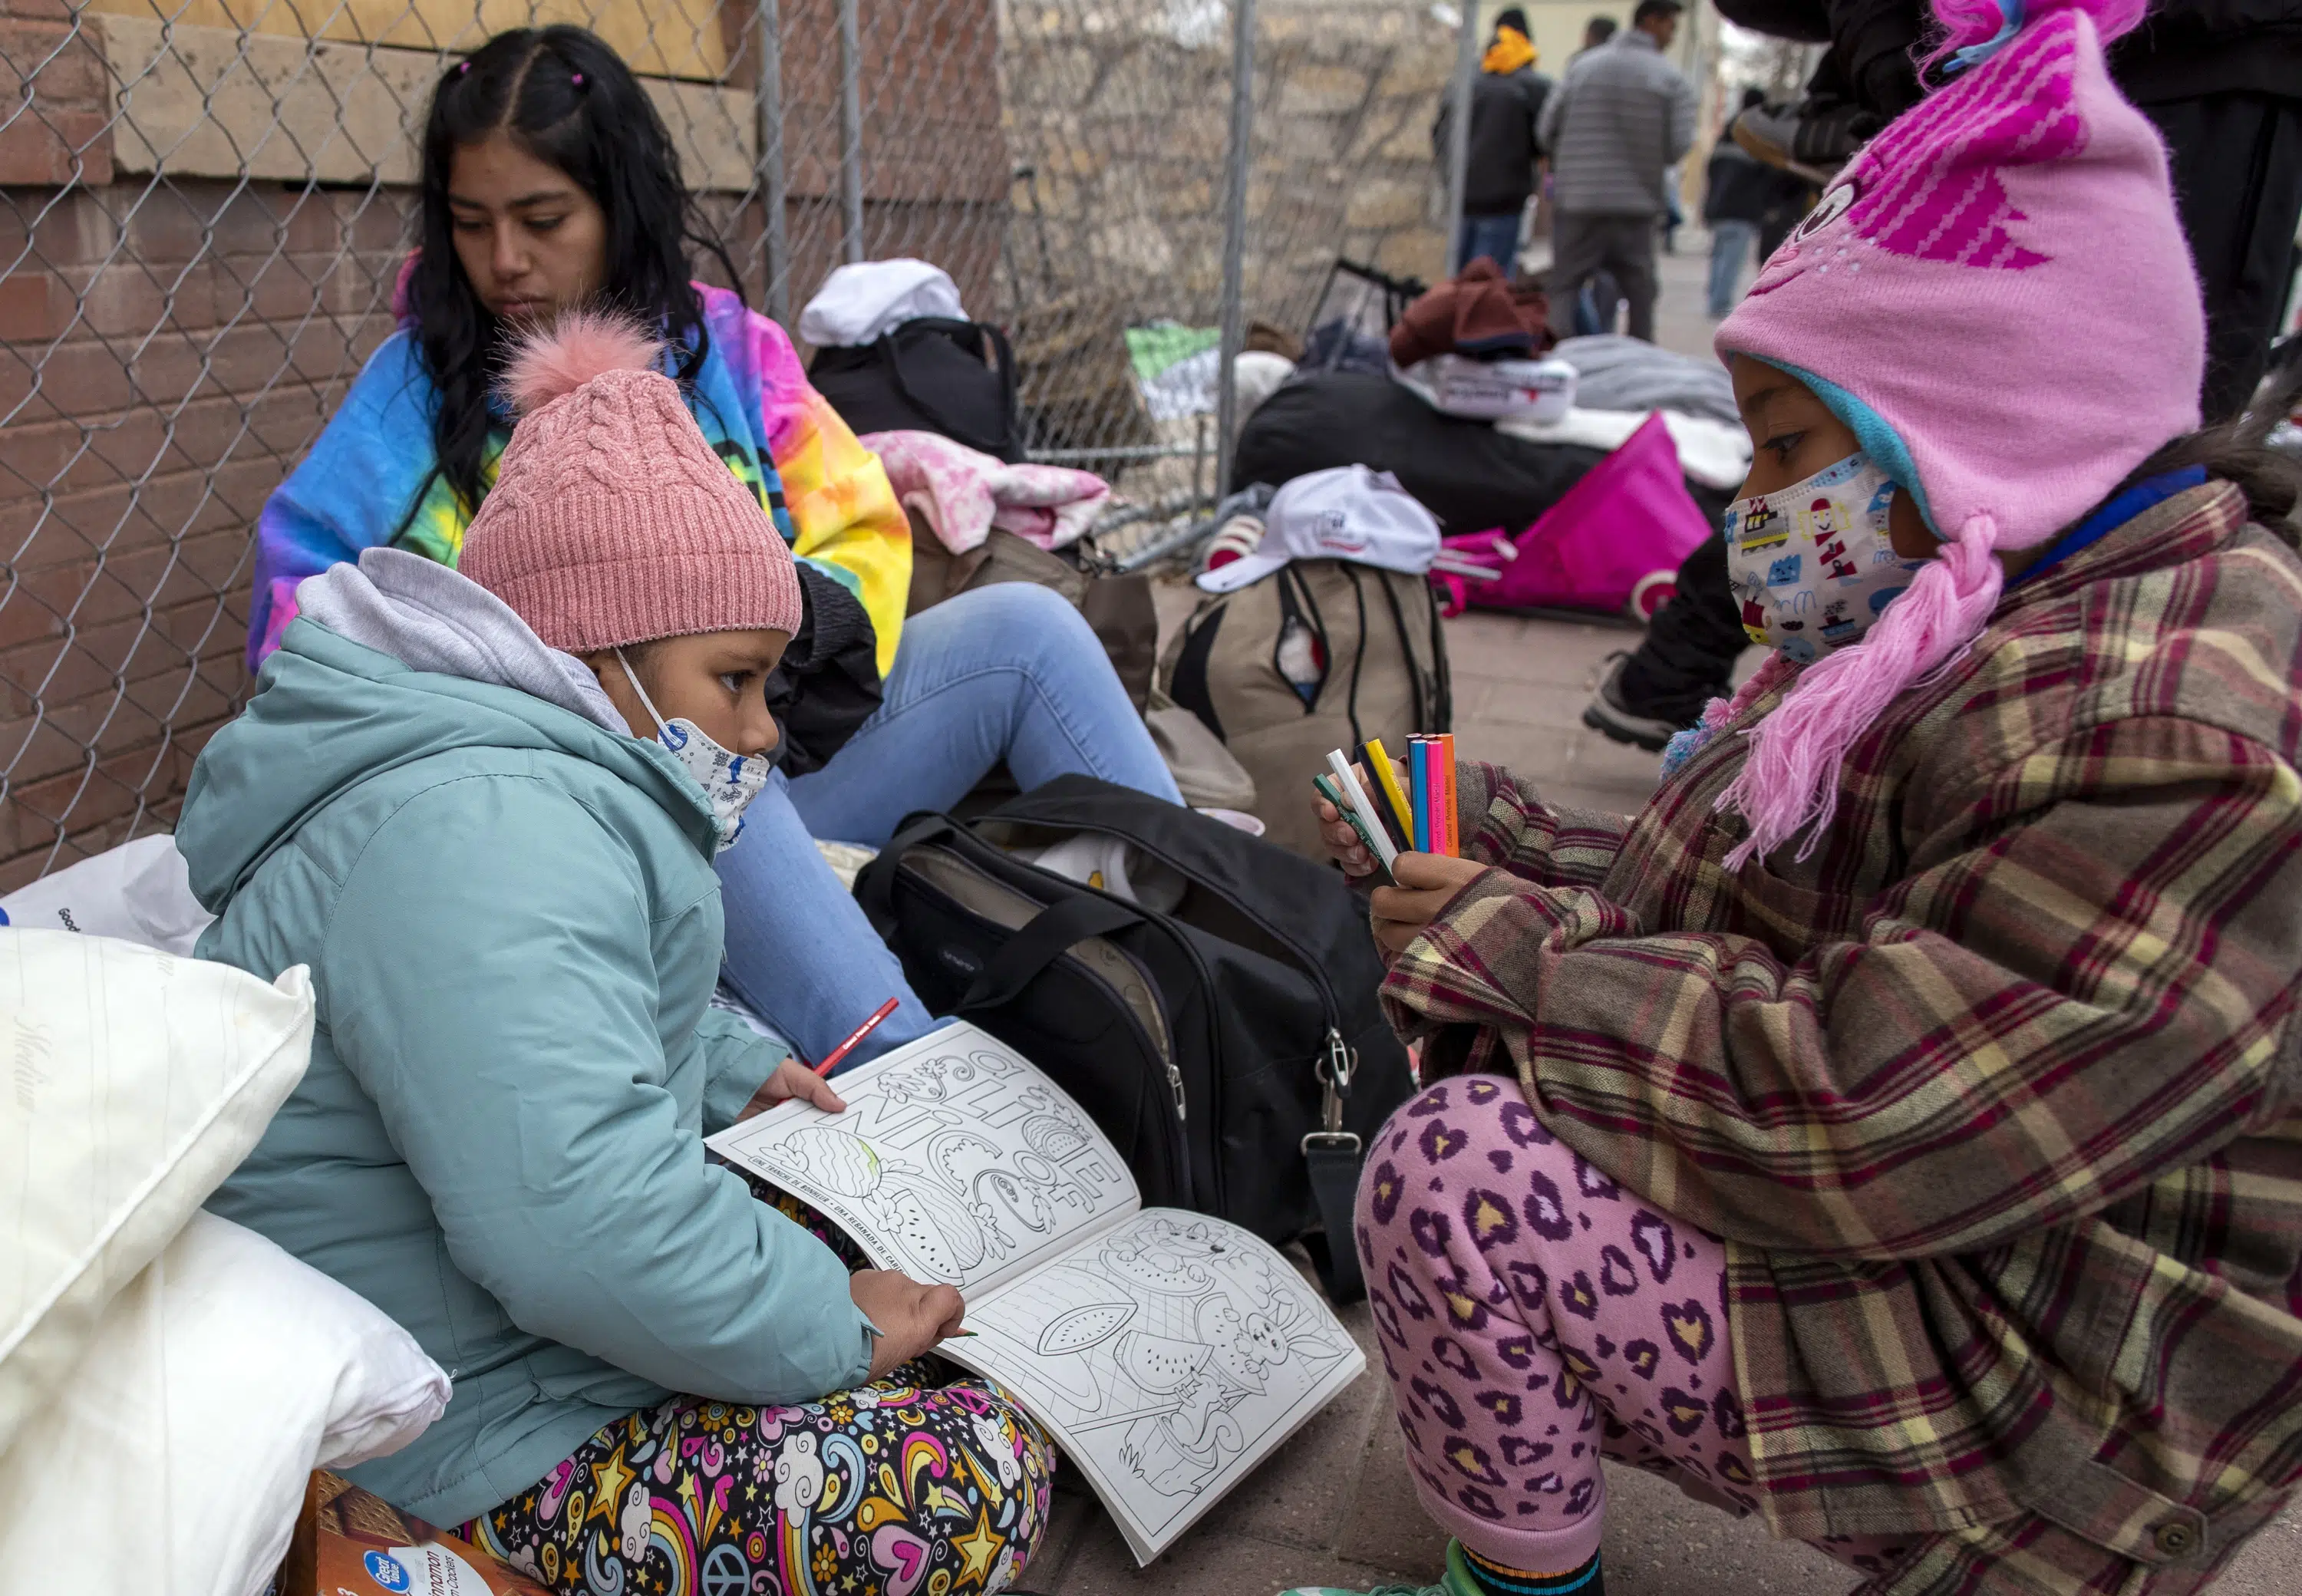 How will asylum work after Title 42 ends? No one knows yet